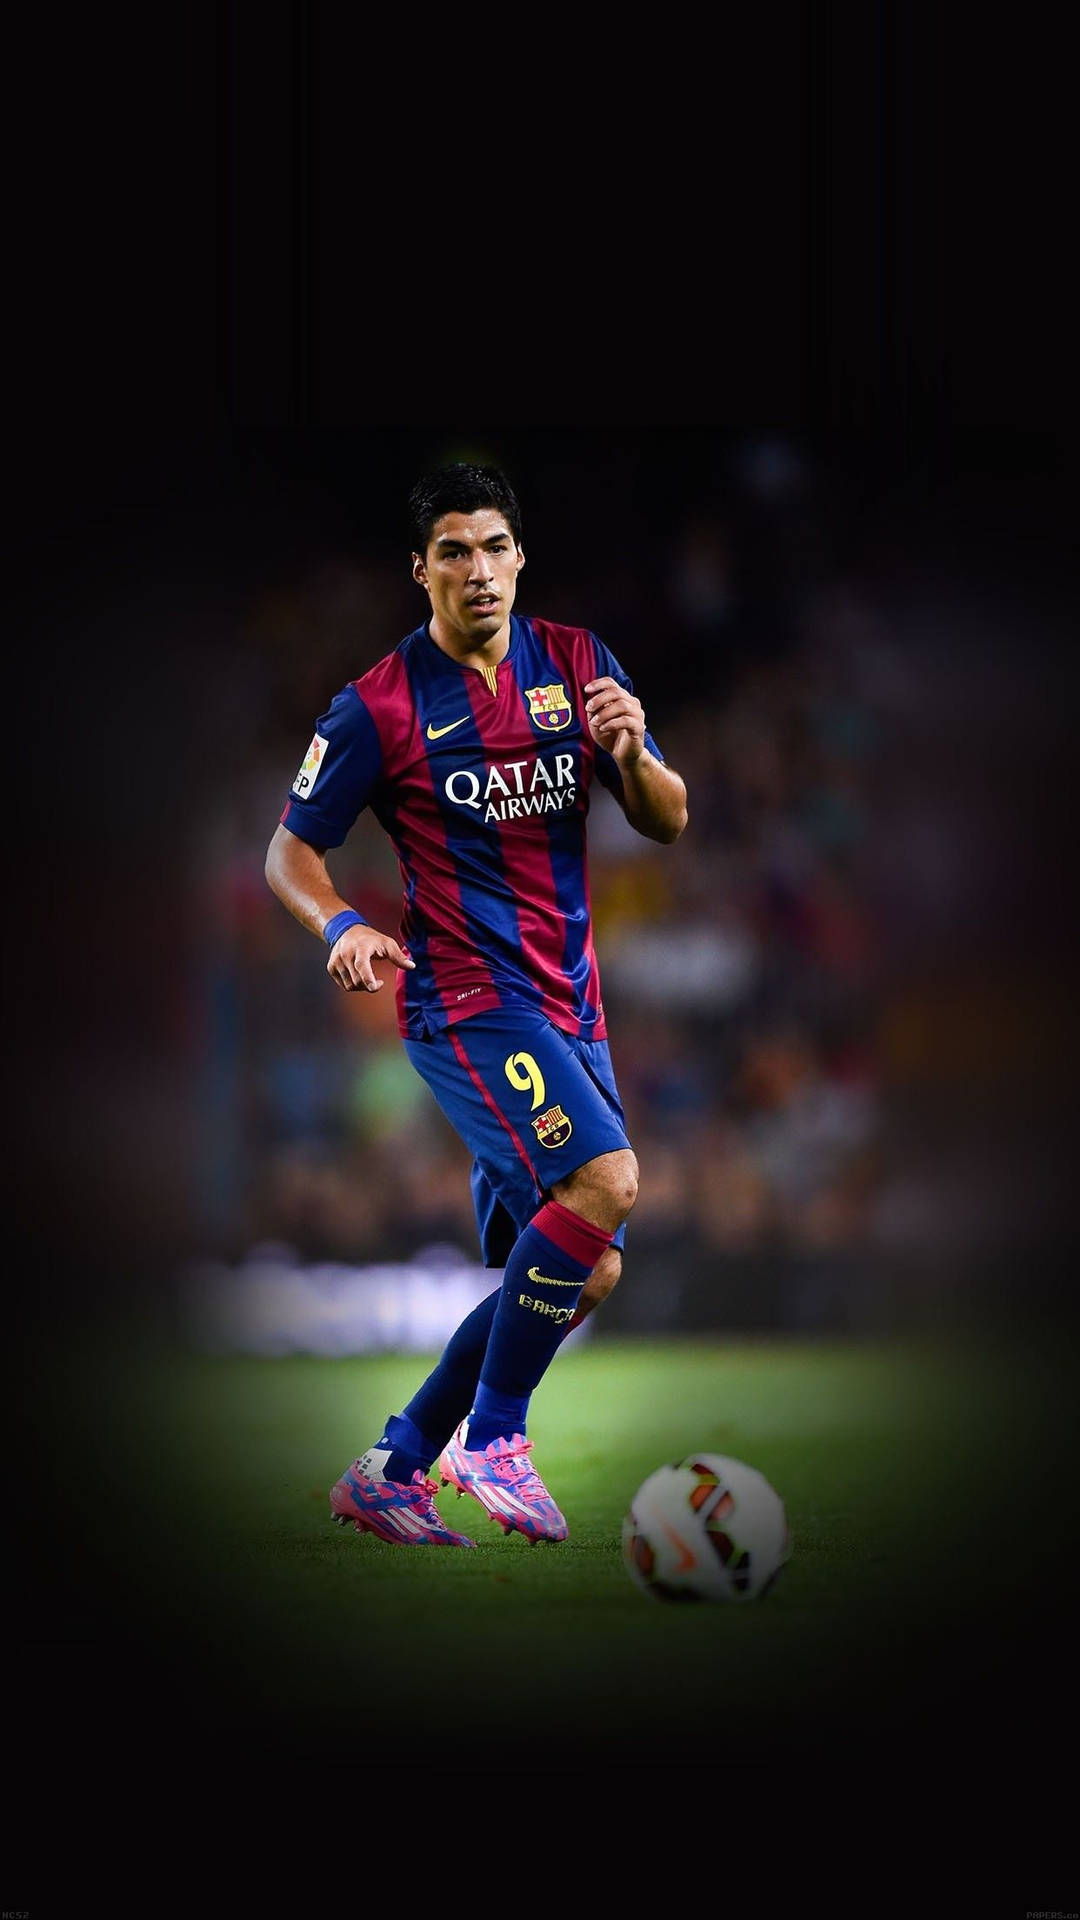 Professional Soccer Player Striding on the Field Wallpaper